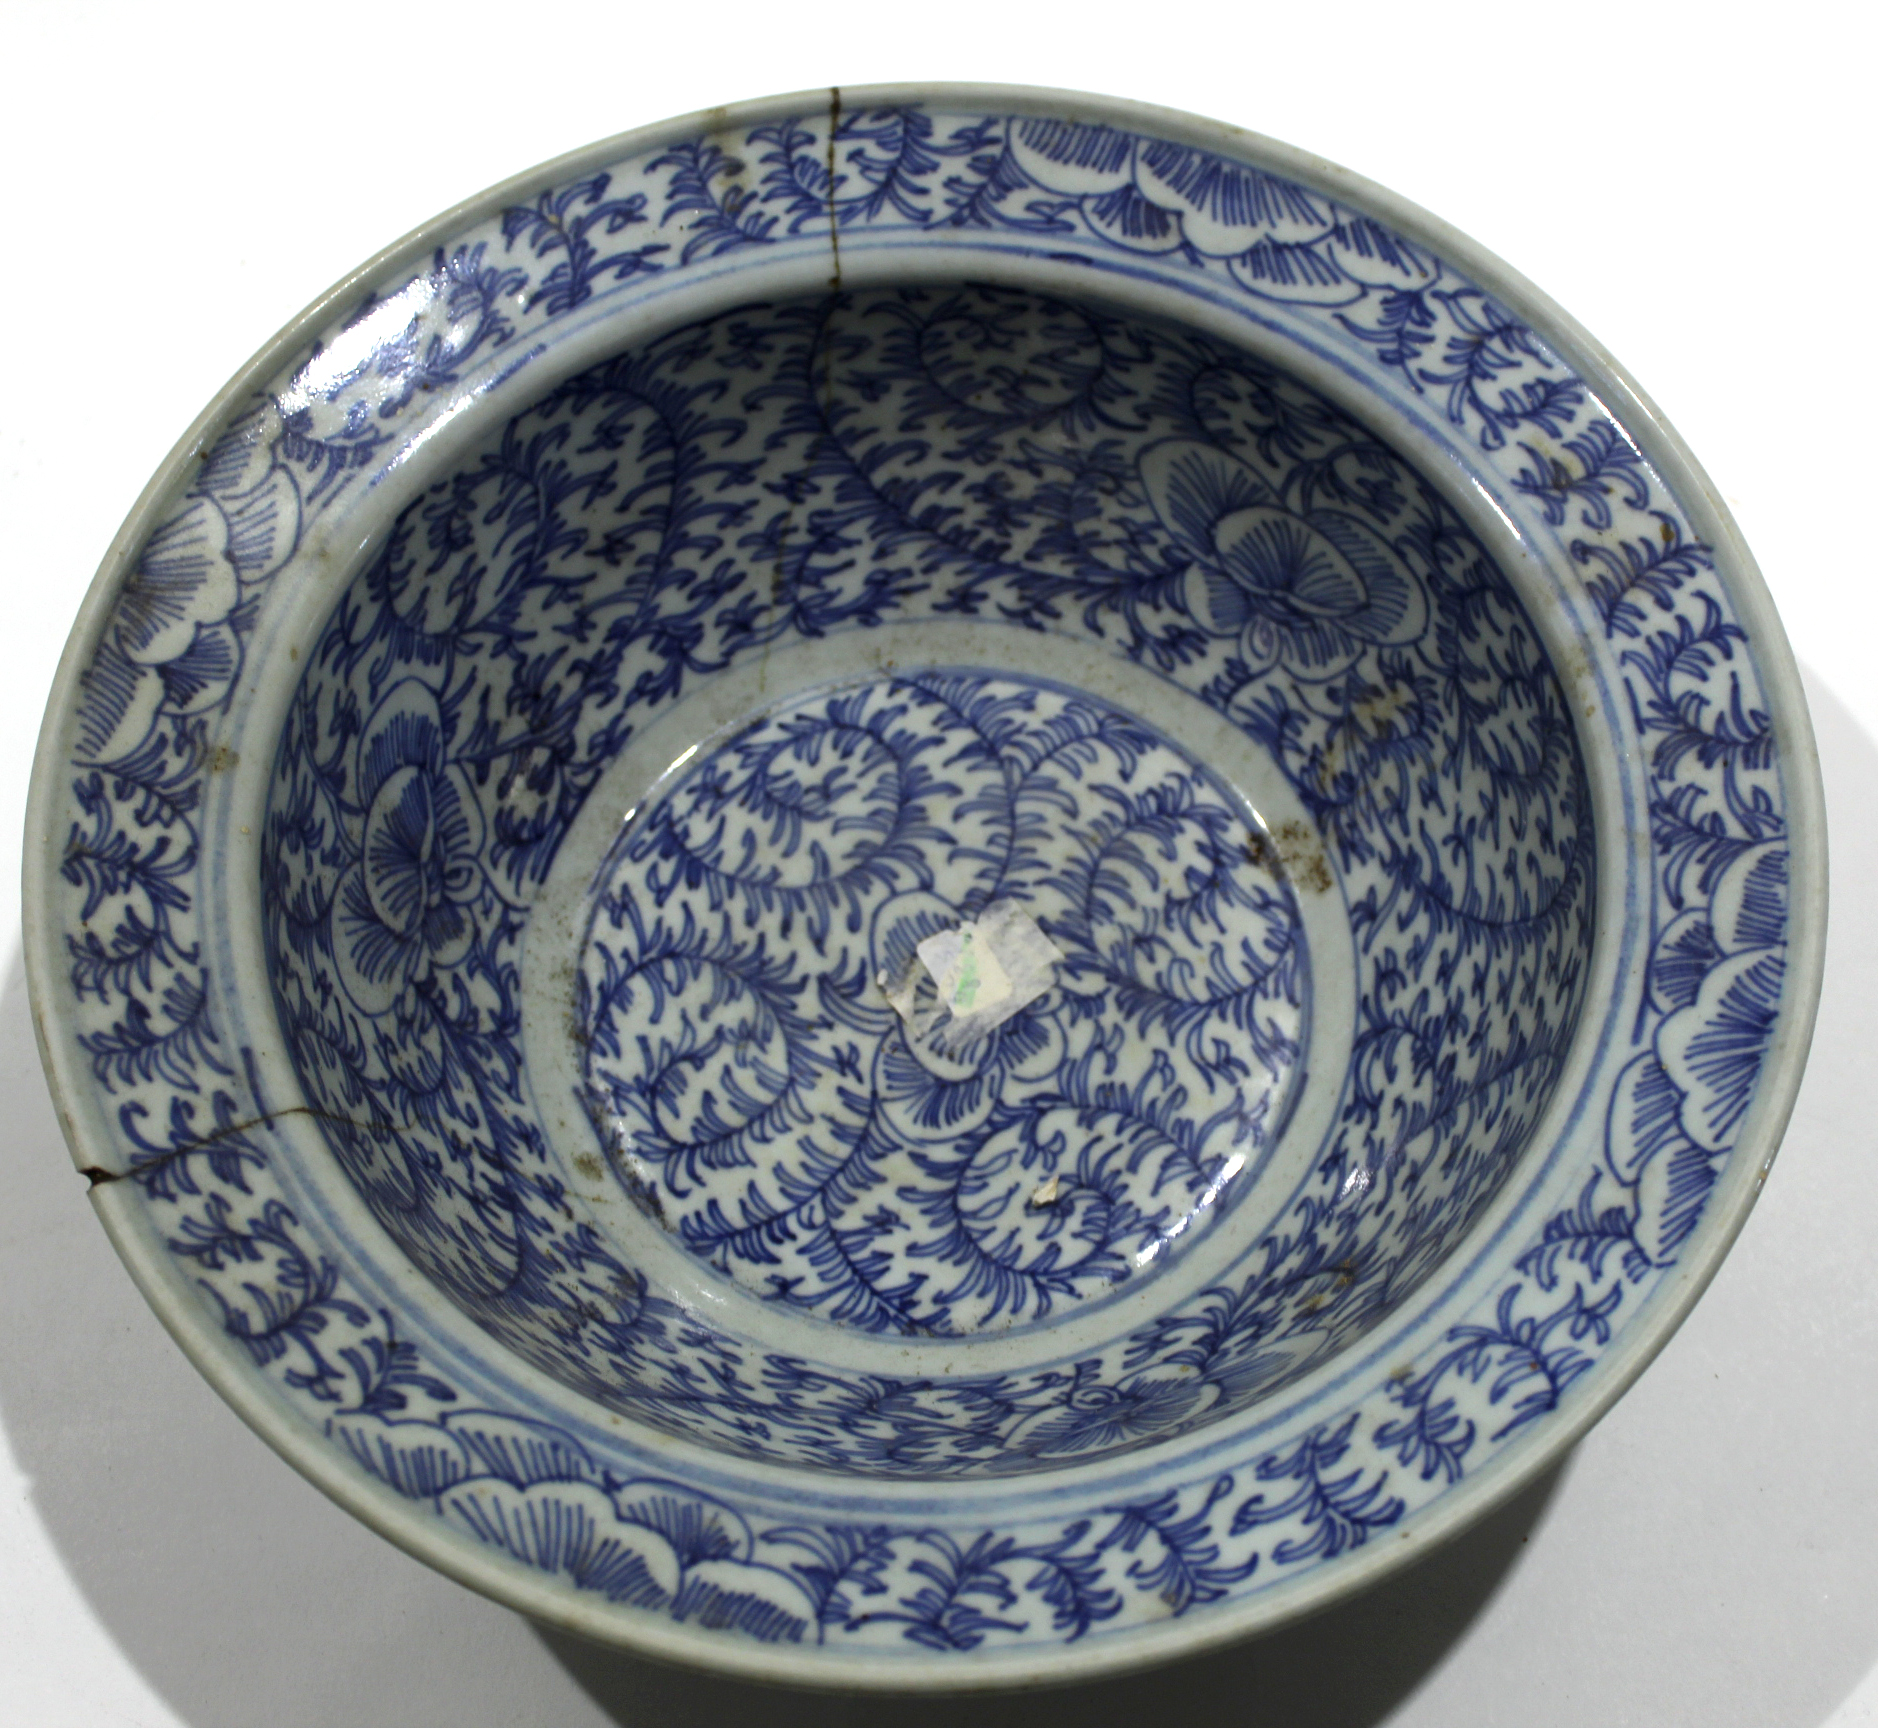 Ming style bowl, decorated in typical fashion with sale label for Philips Lot No 284 Sale No 1694, - Image 2 of 8